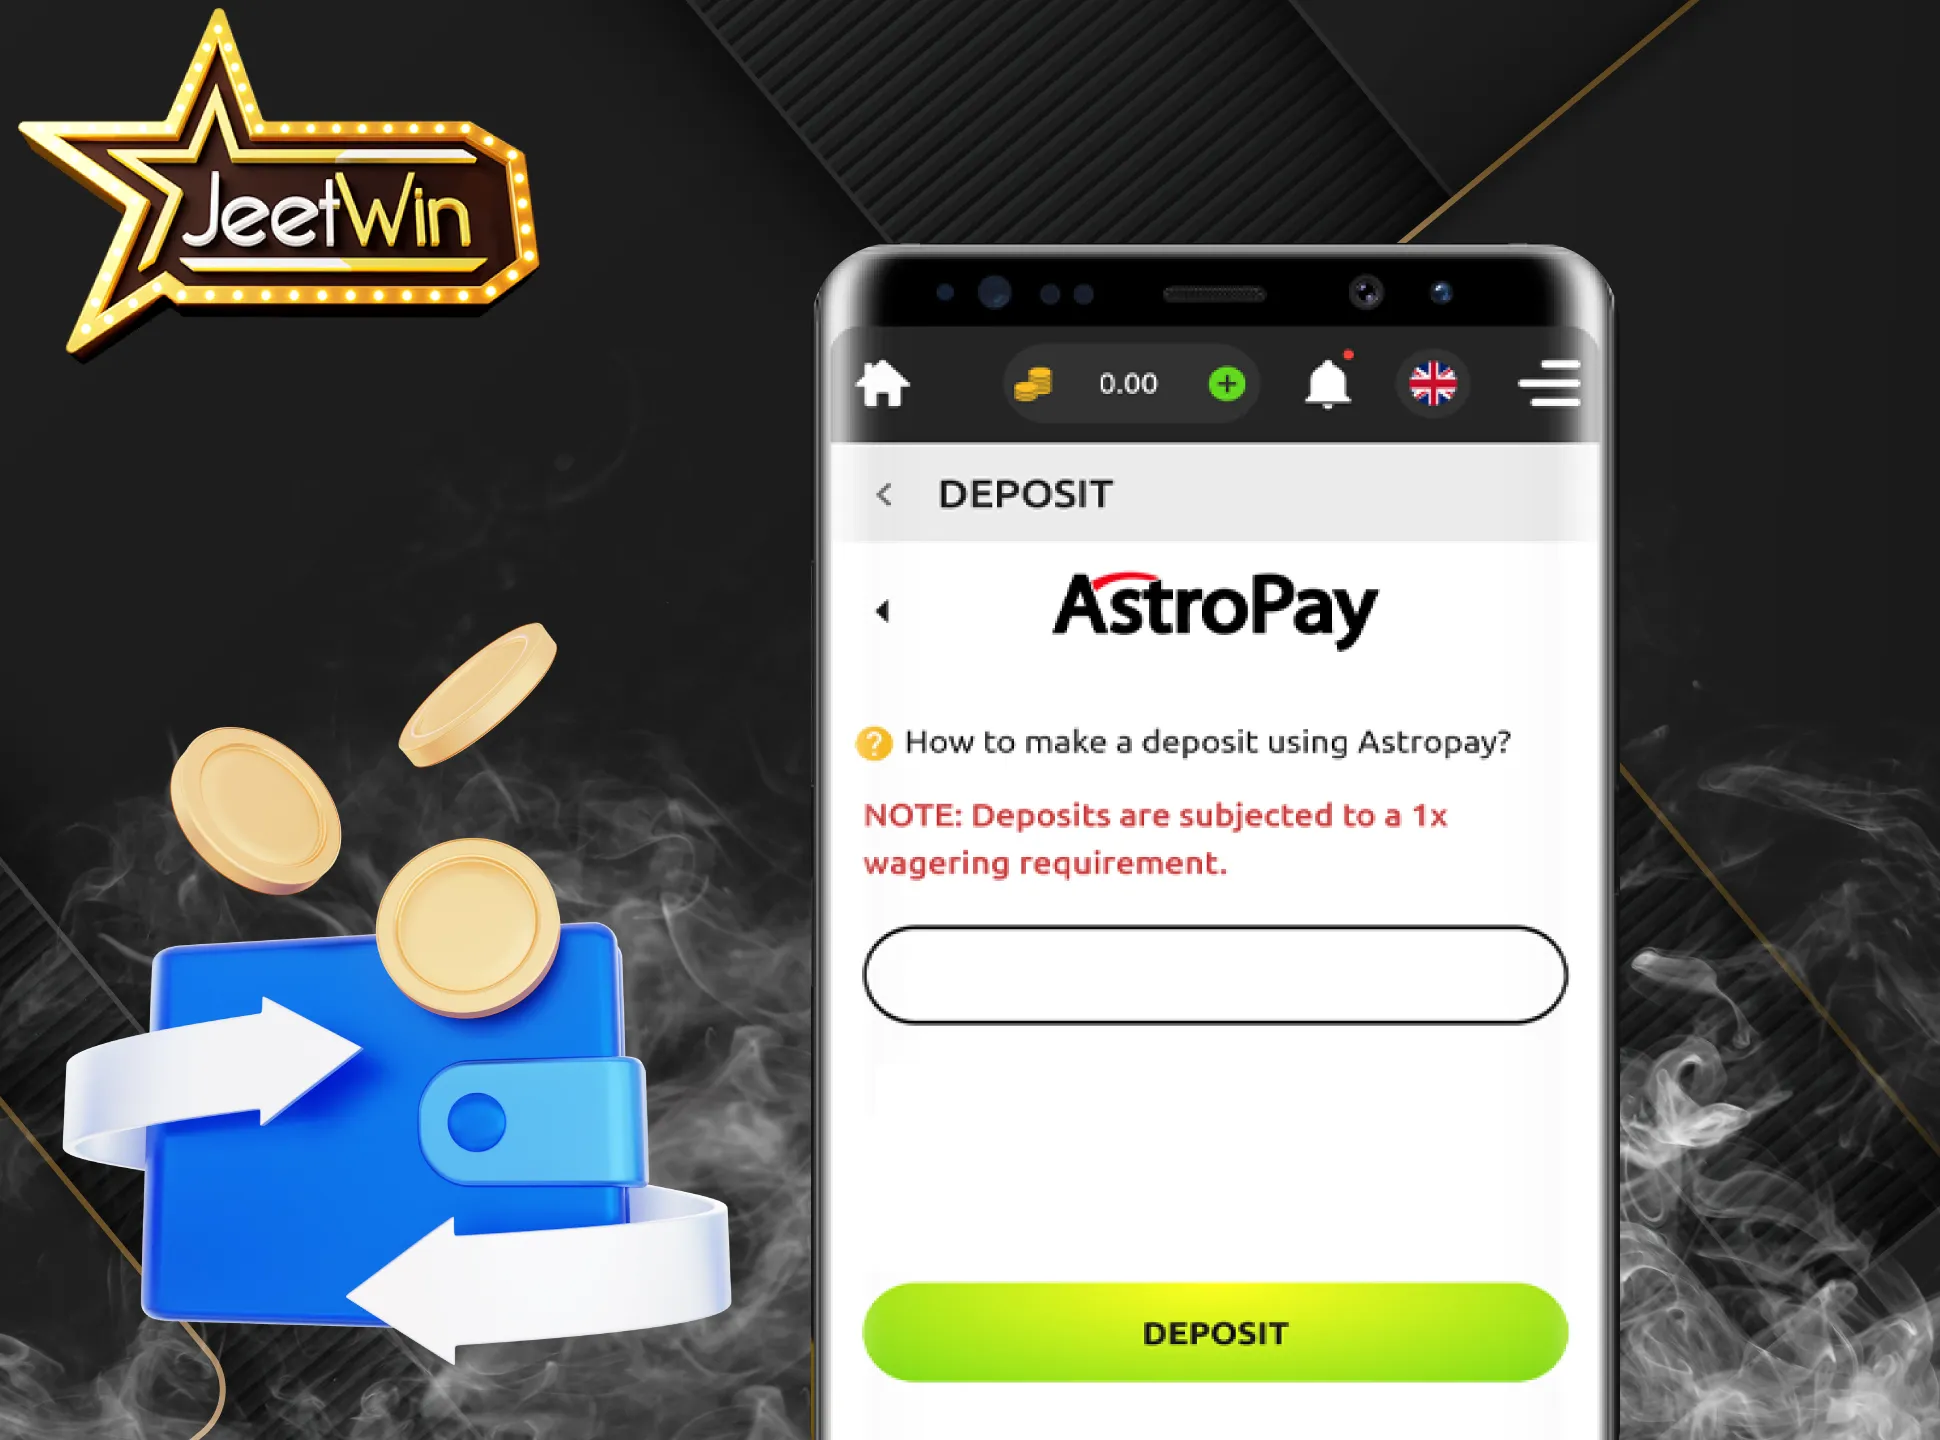 Familiarize yourself with the most popular payment systems on the JeetWin app.